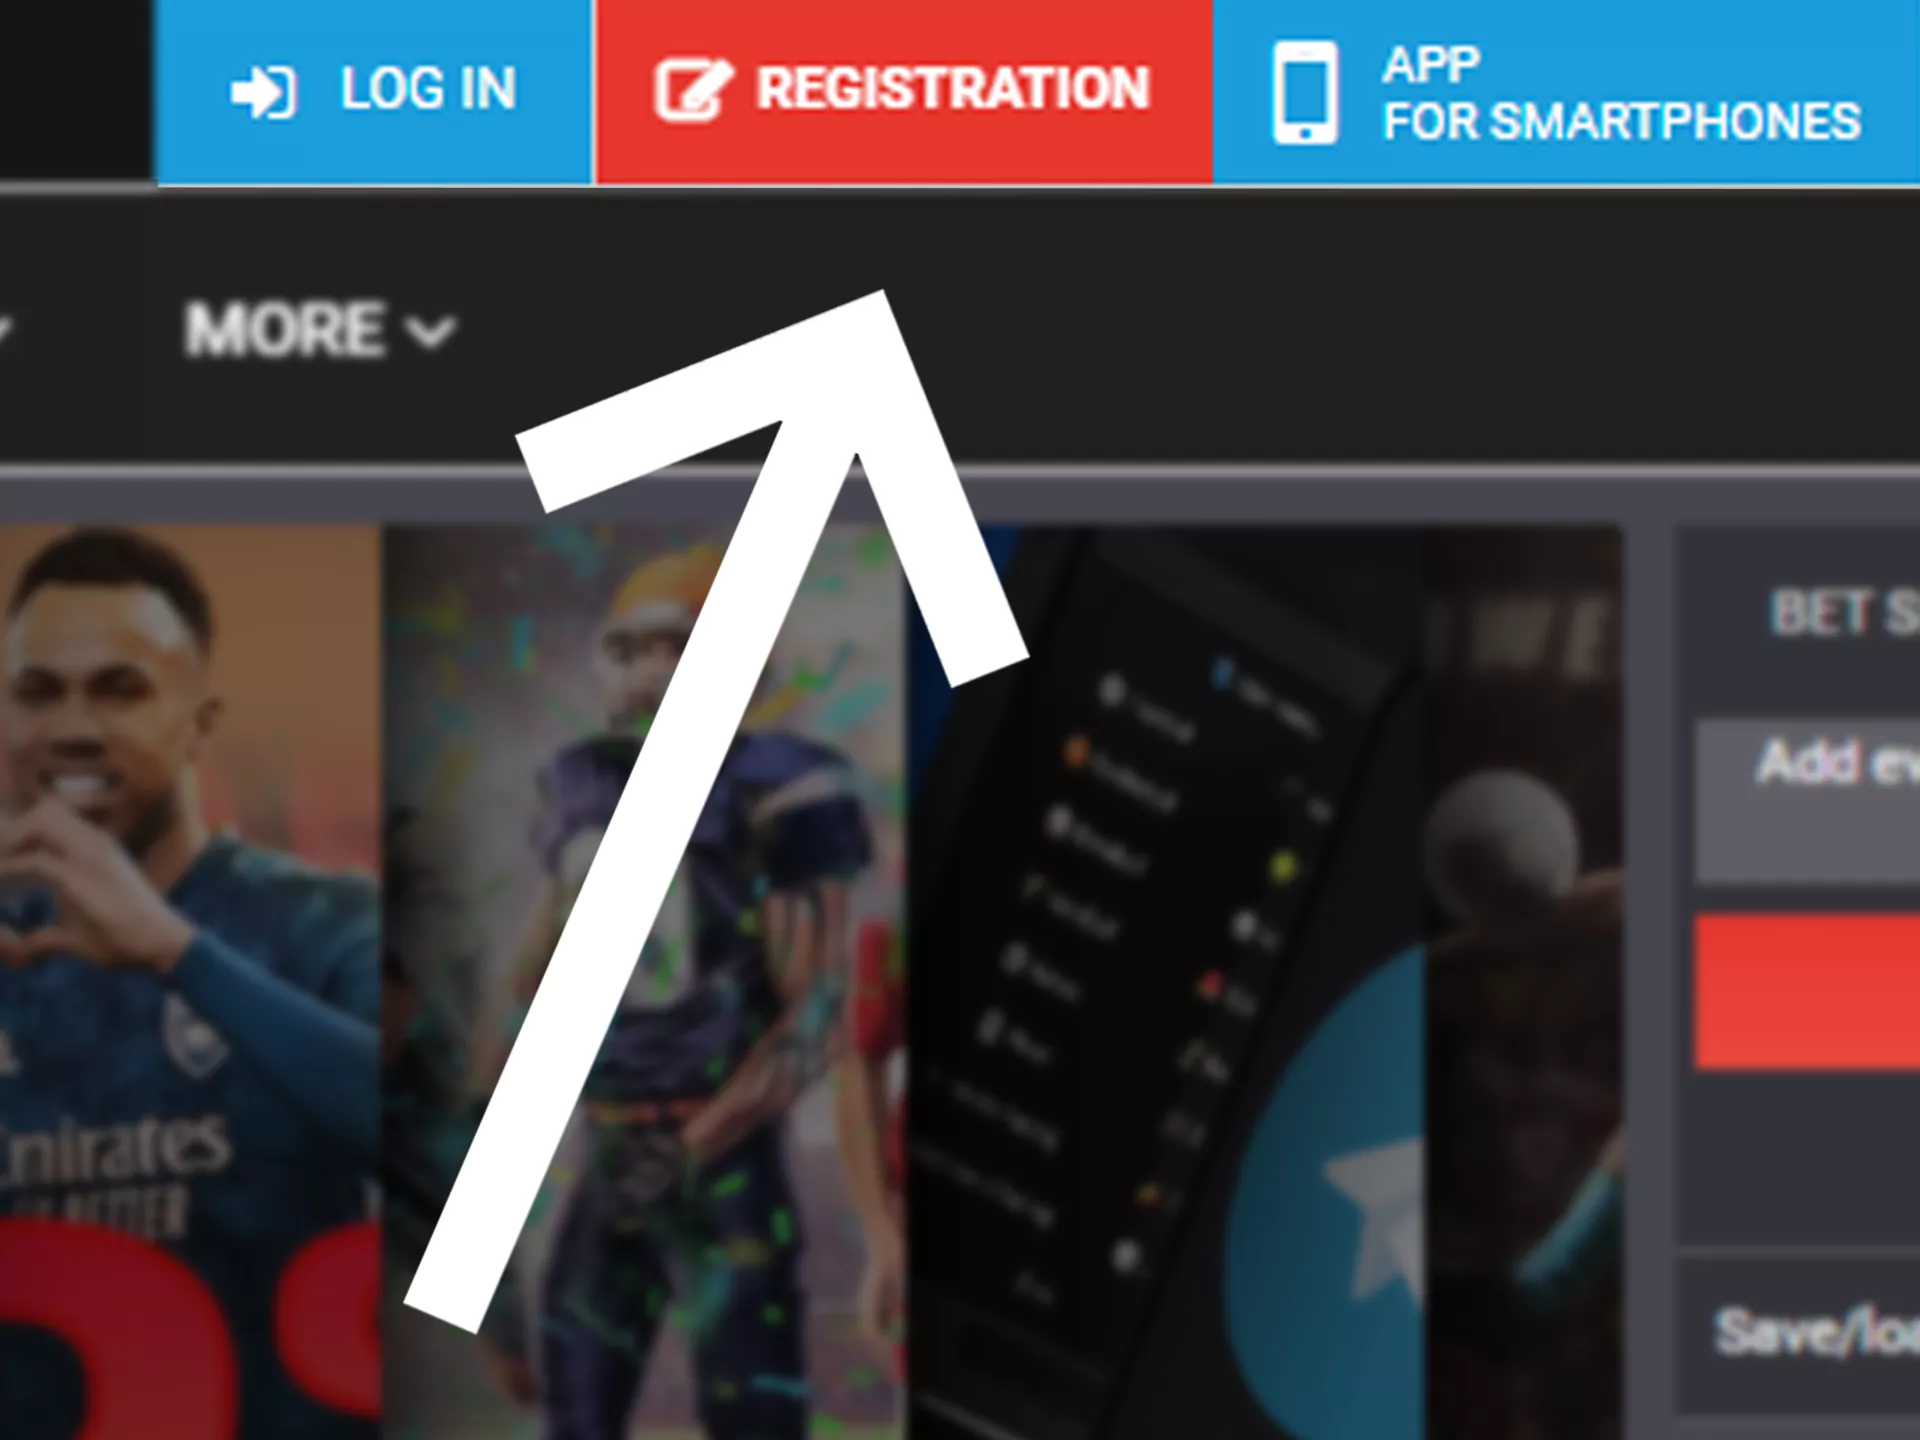 Start registration on top of the site.